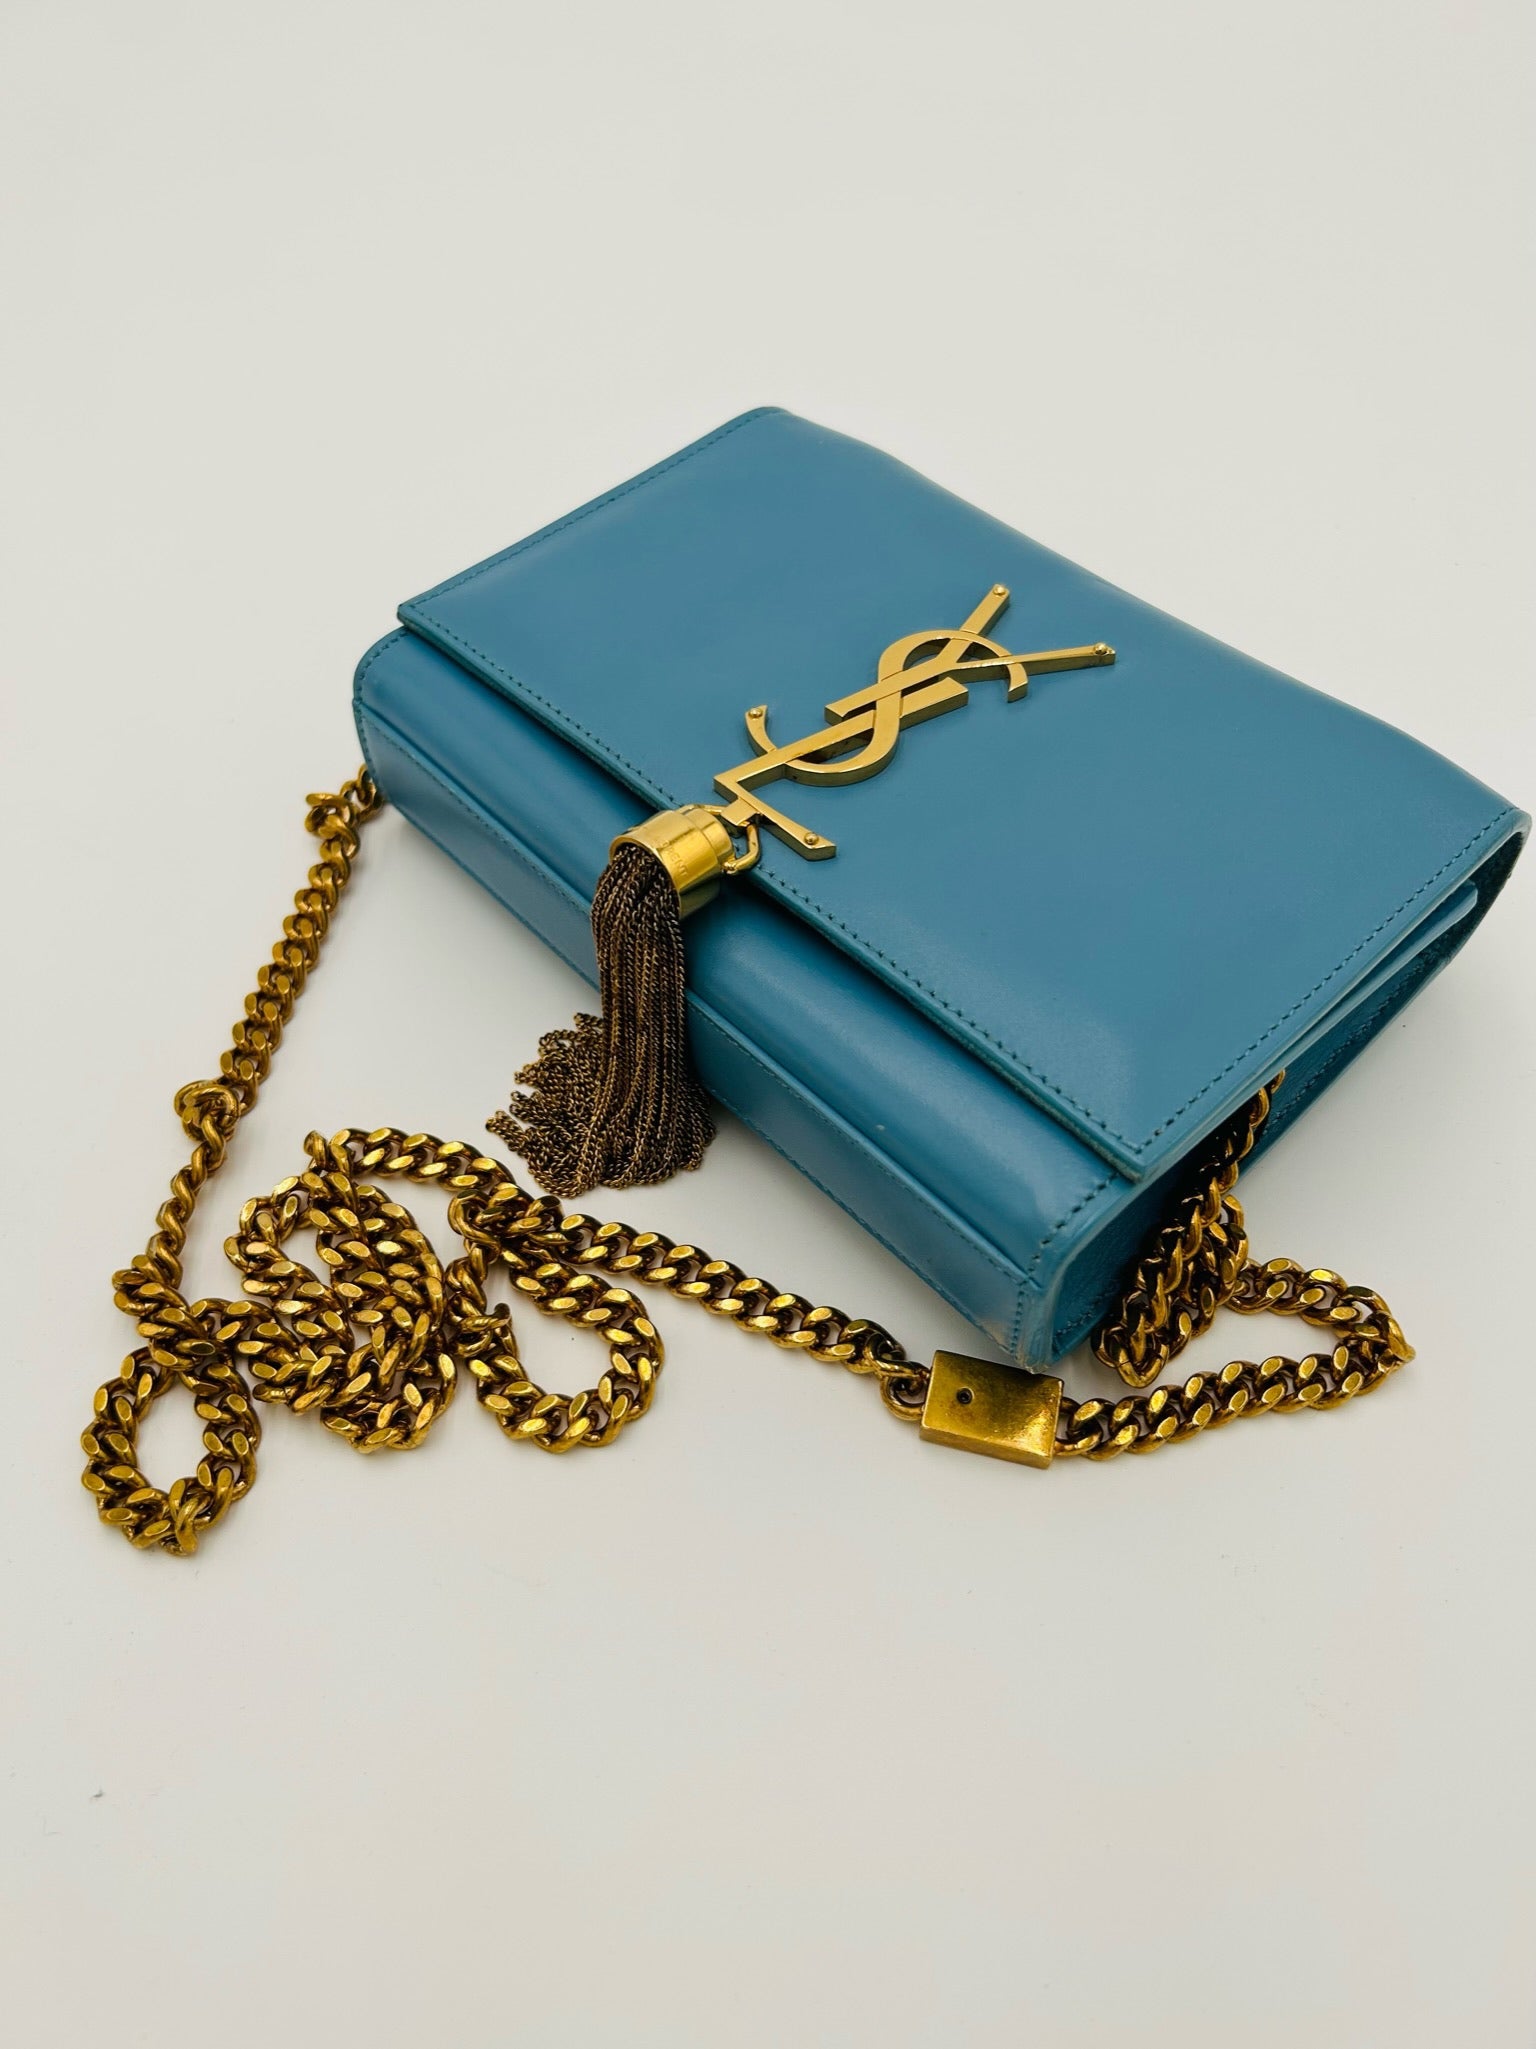 YSL KATE SMALL CHAIN BAG IN GRAIN DE POUDRE LEATHER LIGHT BABY BLUE